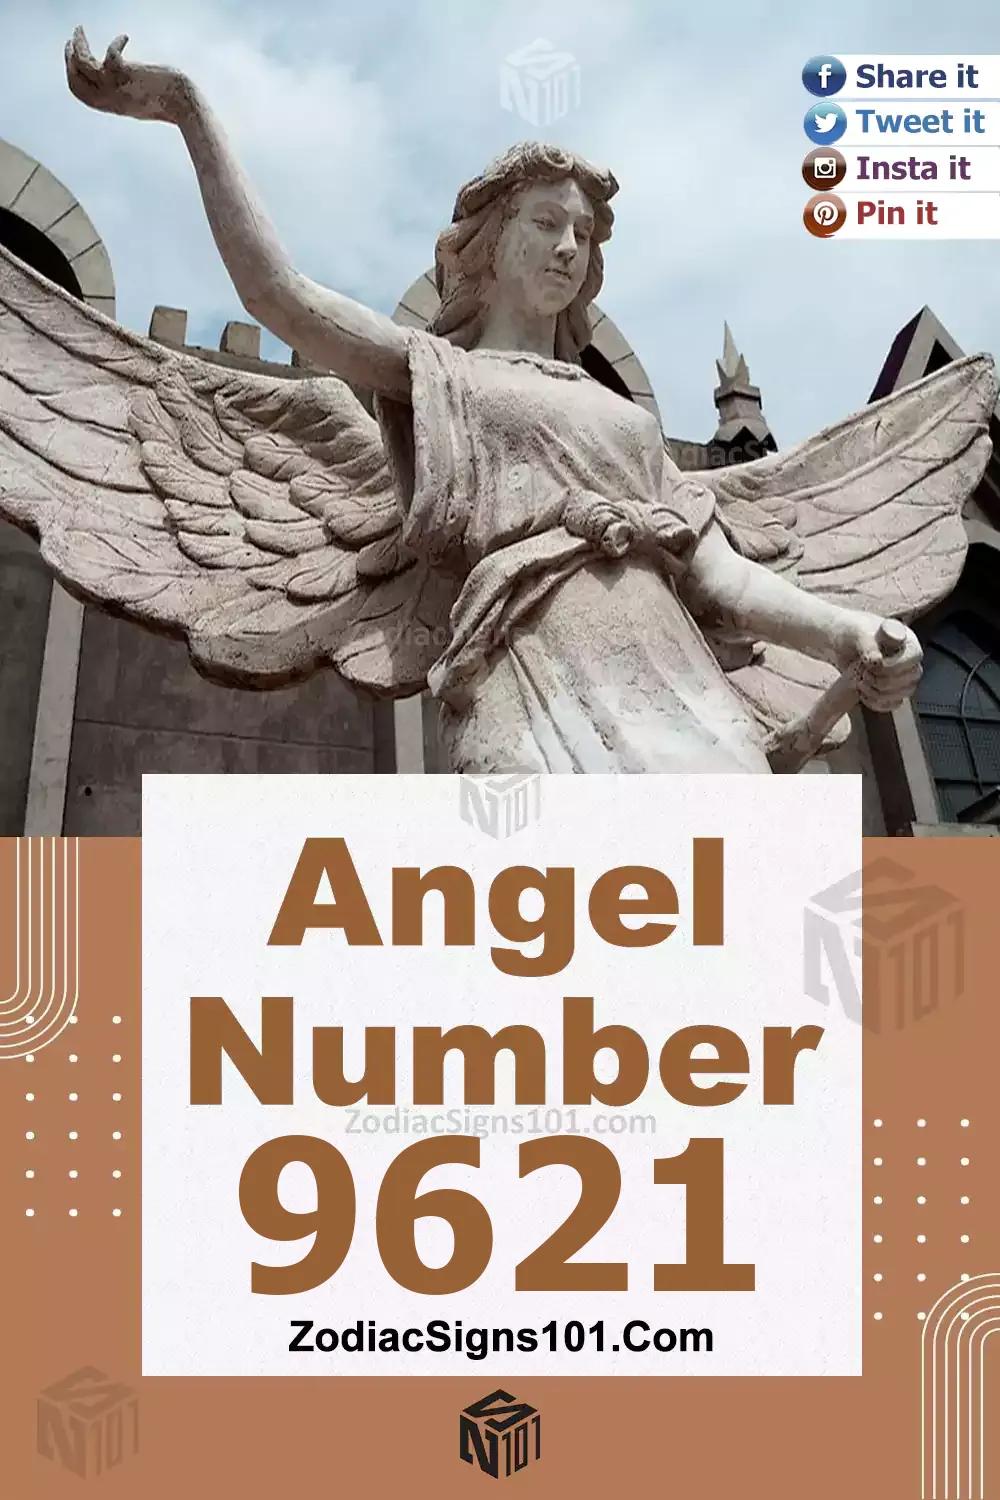 9621 Angel Number Meaning